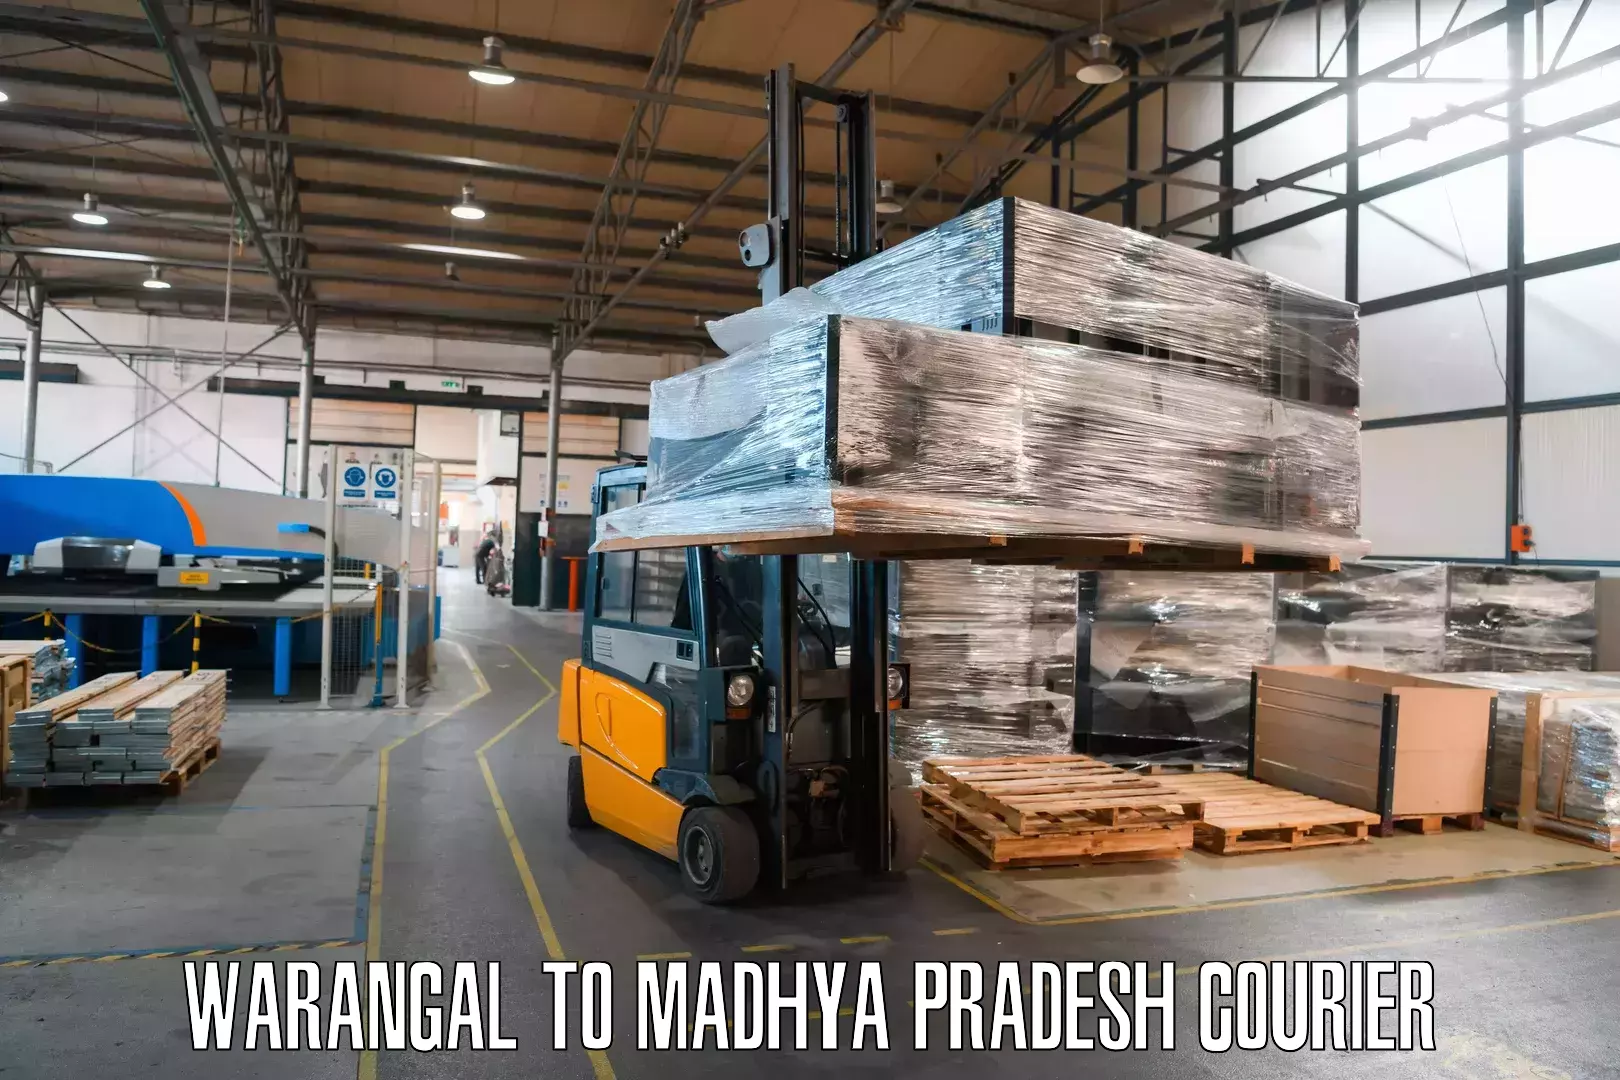 Reliable courier services Warangal to Chand Chaurai